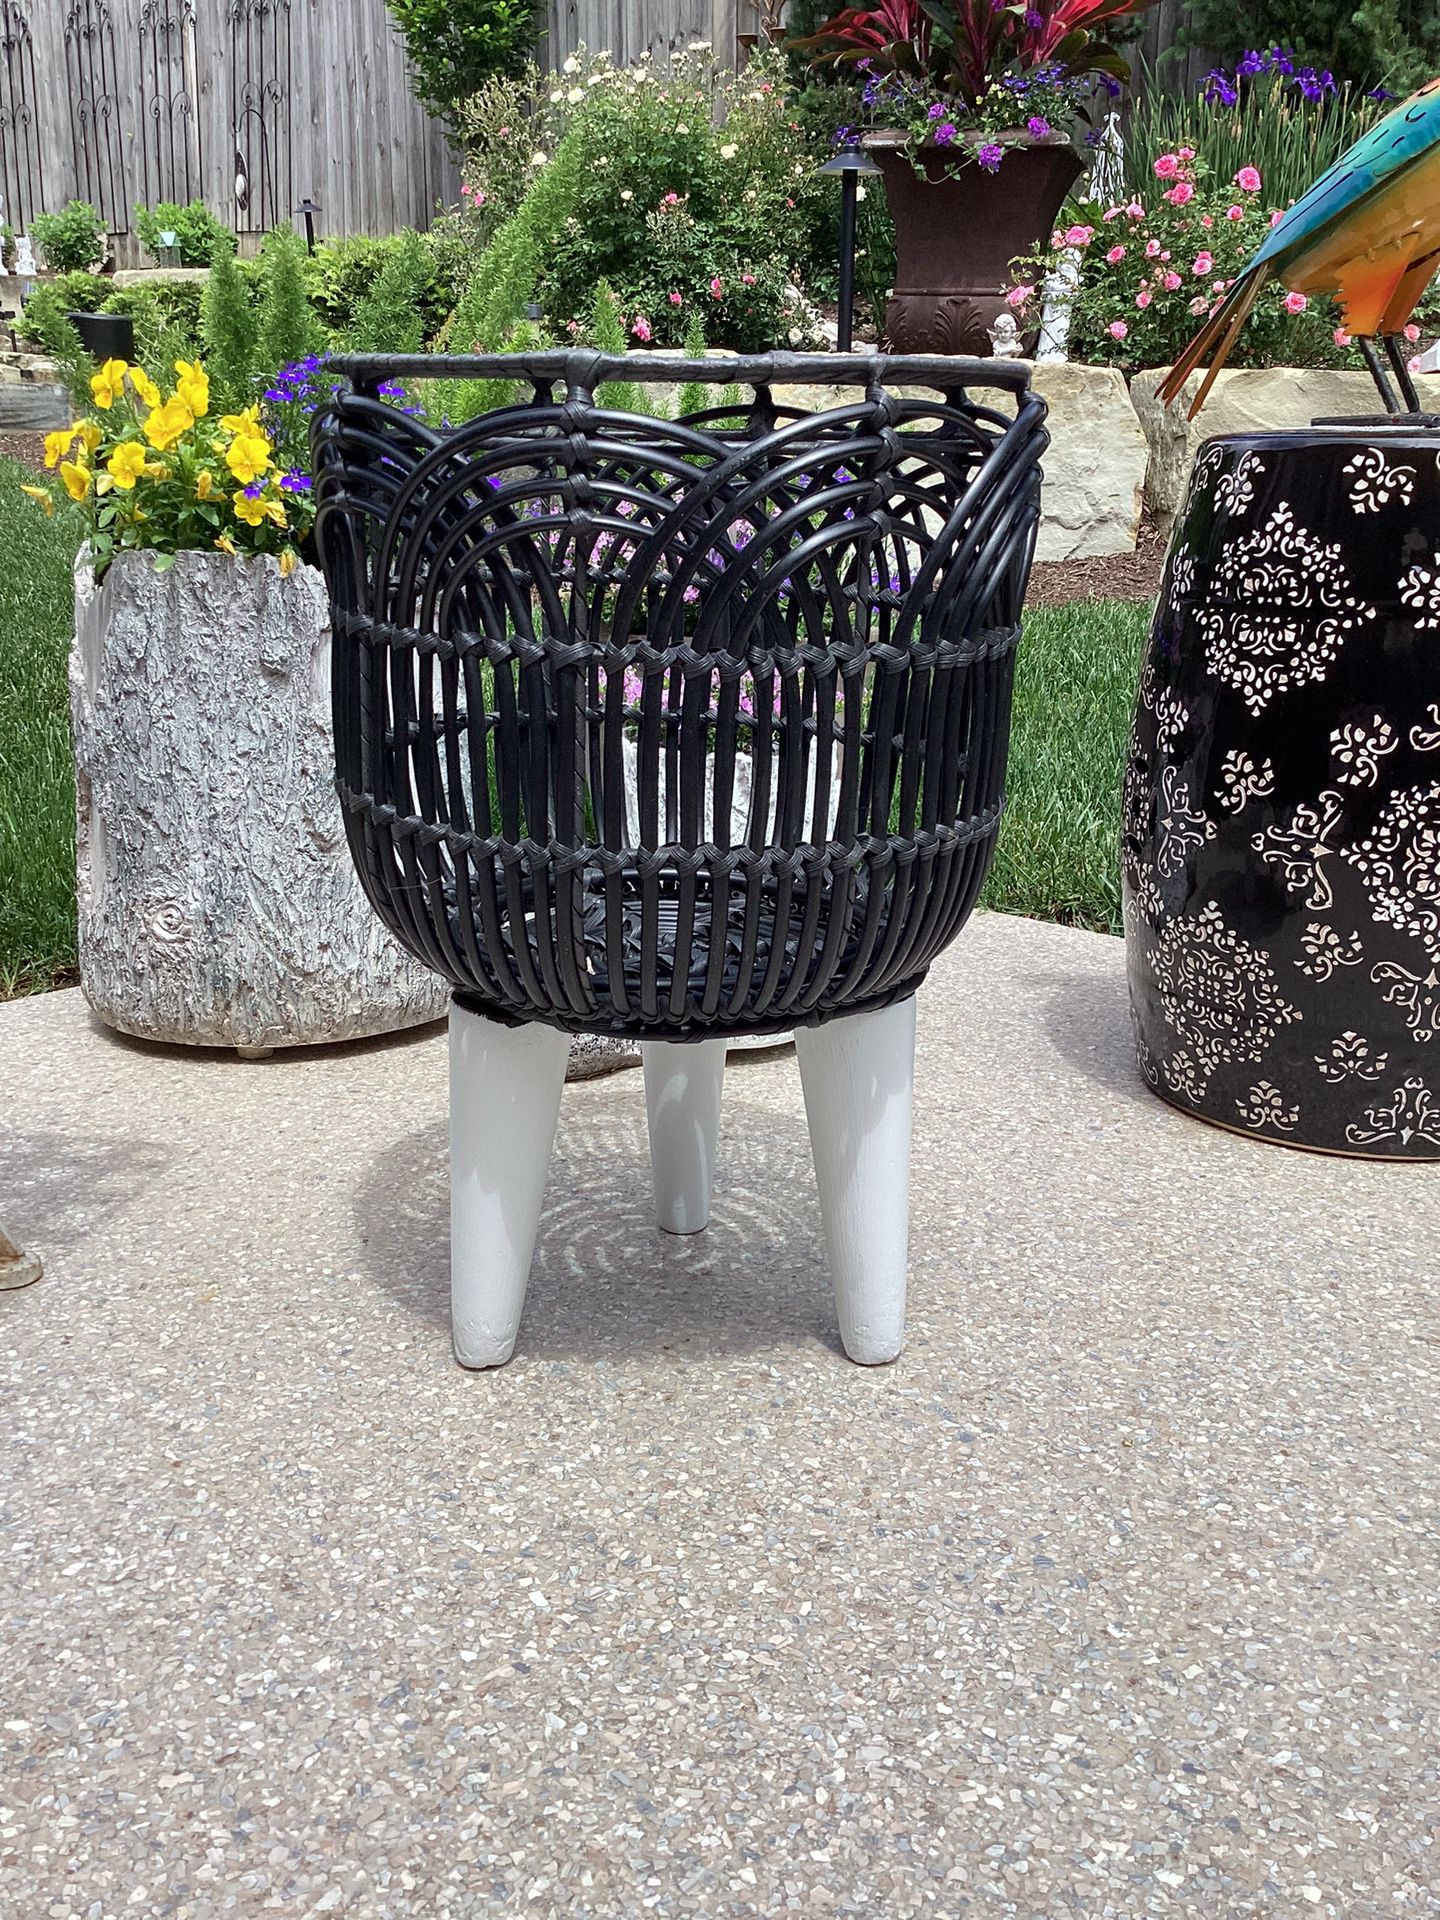 Black Resin Woven Rattan Plant Holder w/Wood Legs 18.5”T x 12.5”W (wipes, clean) The Plant Is Not Included